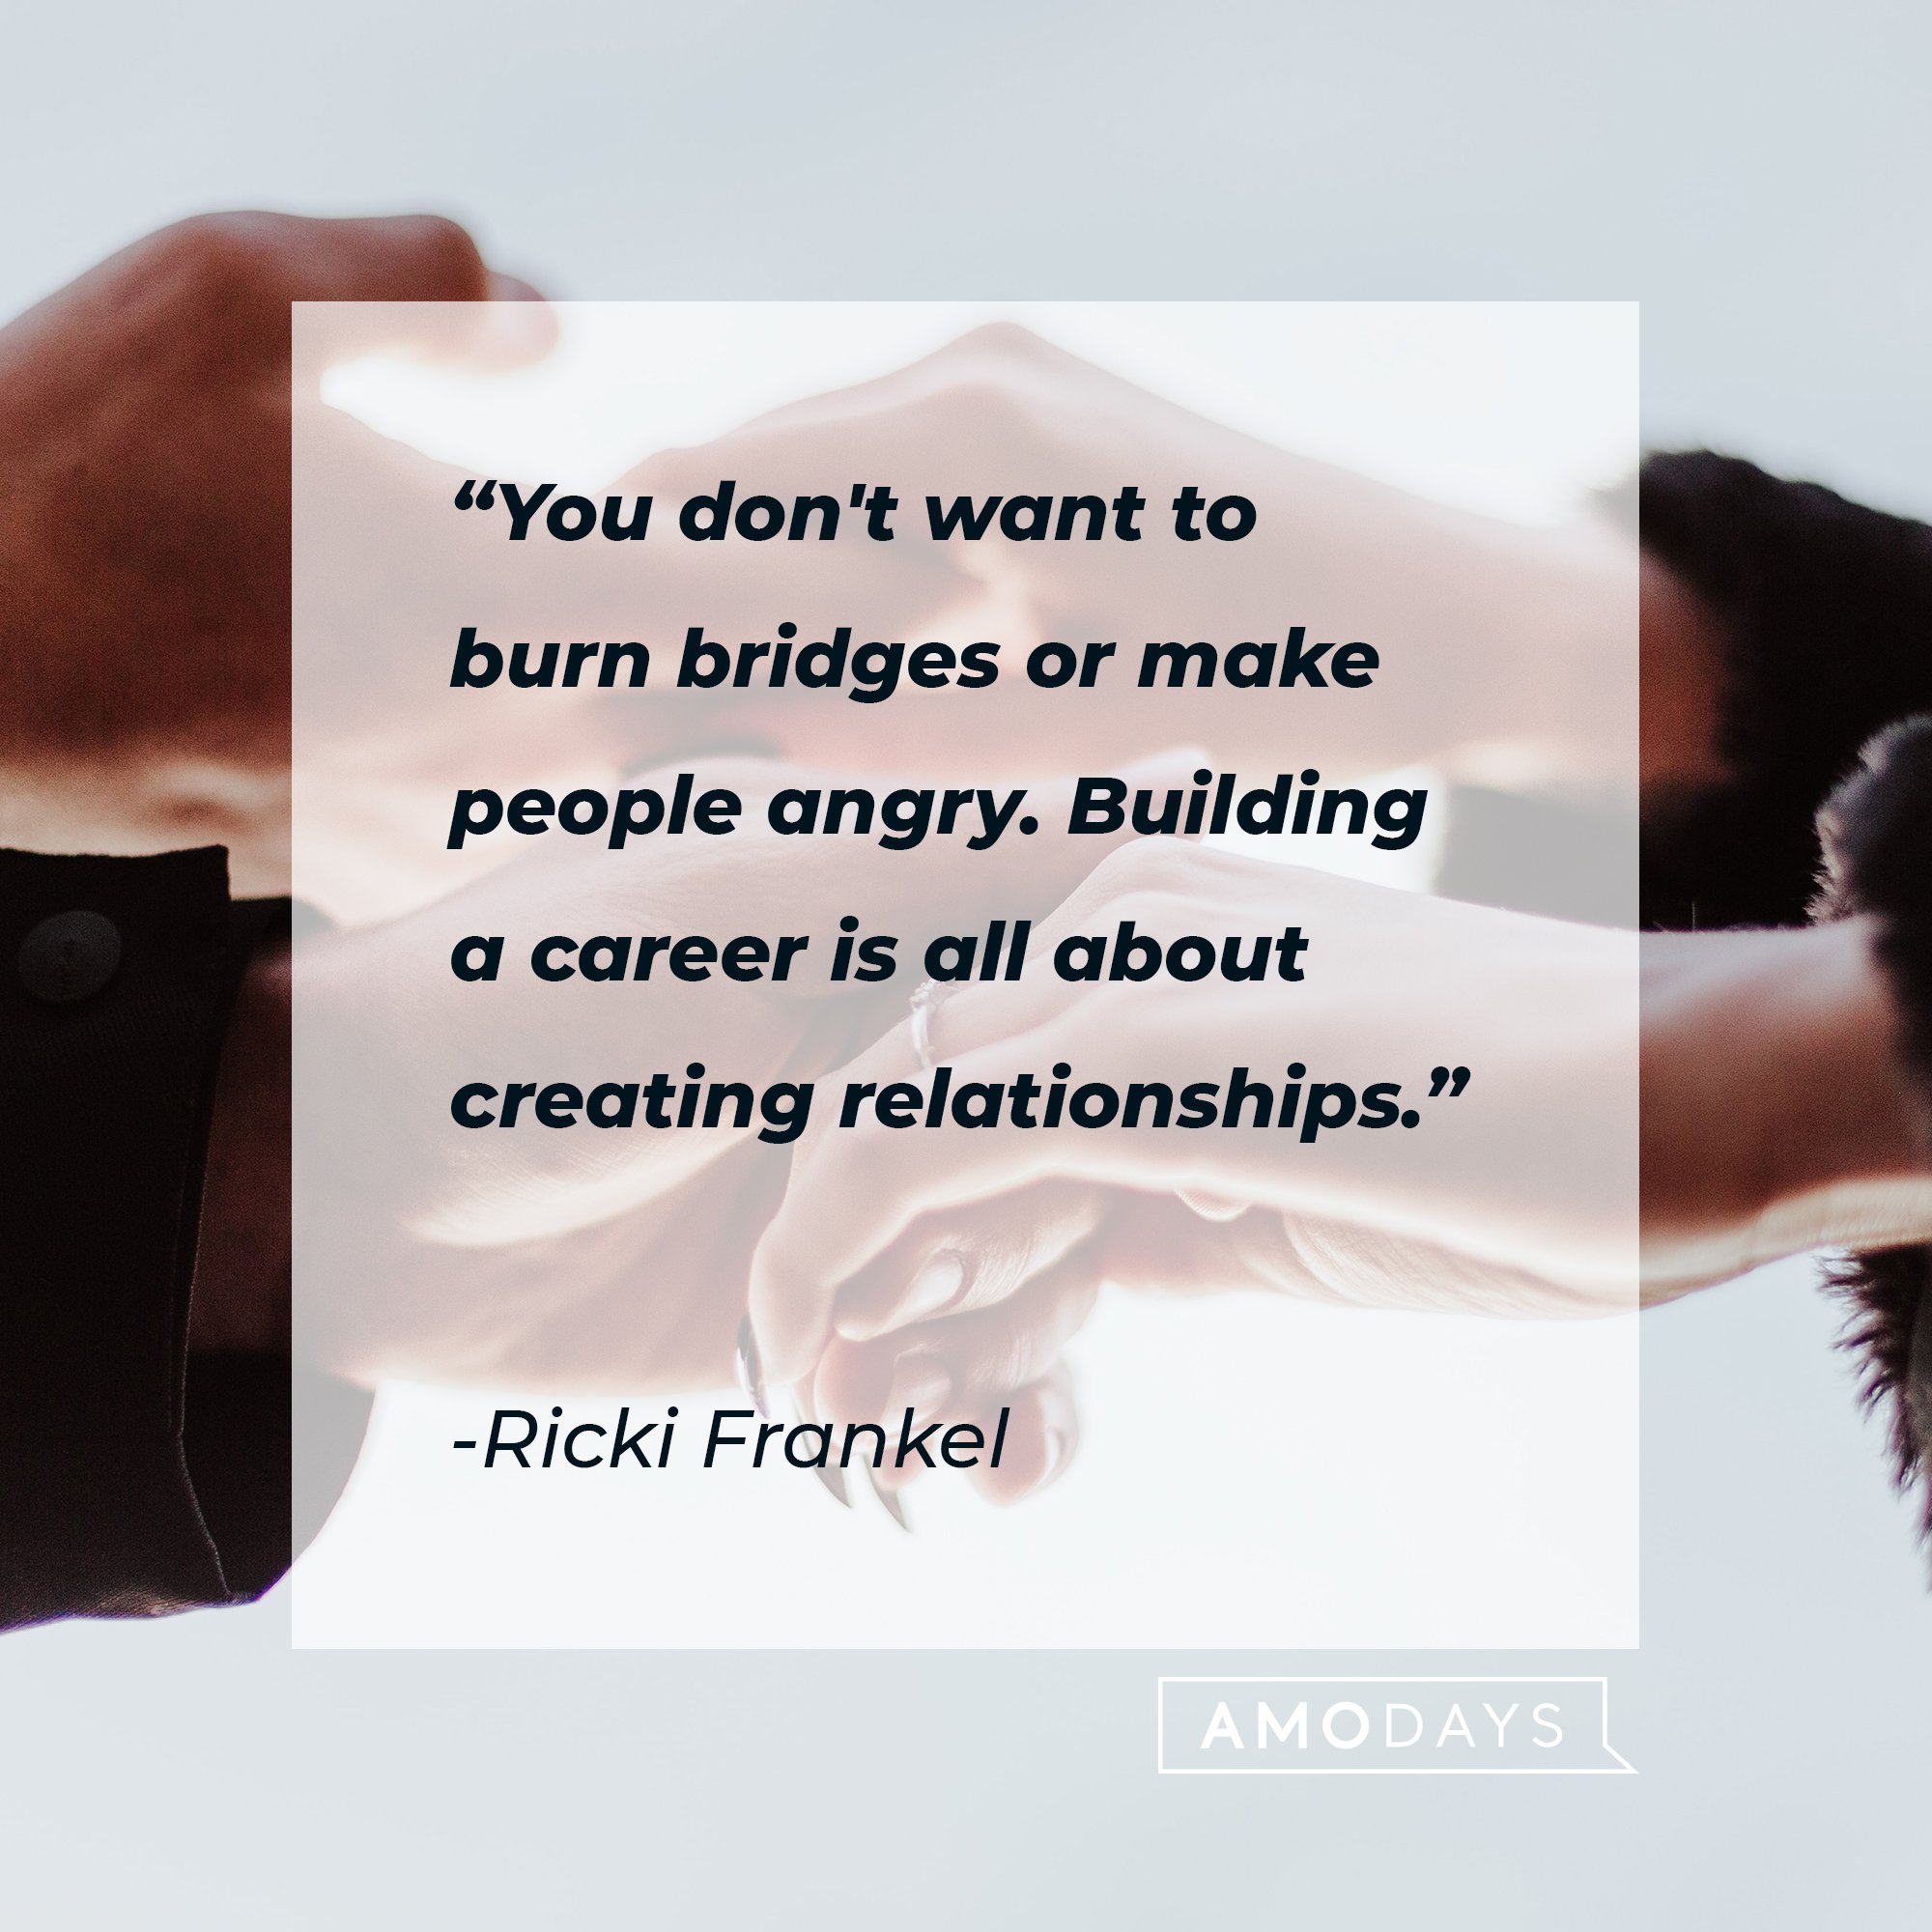 Ricki Frankel's quote: You don't want to burn bridges or make people angry. Building a career is all about creating relationships." | Image: AmoDays